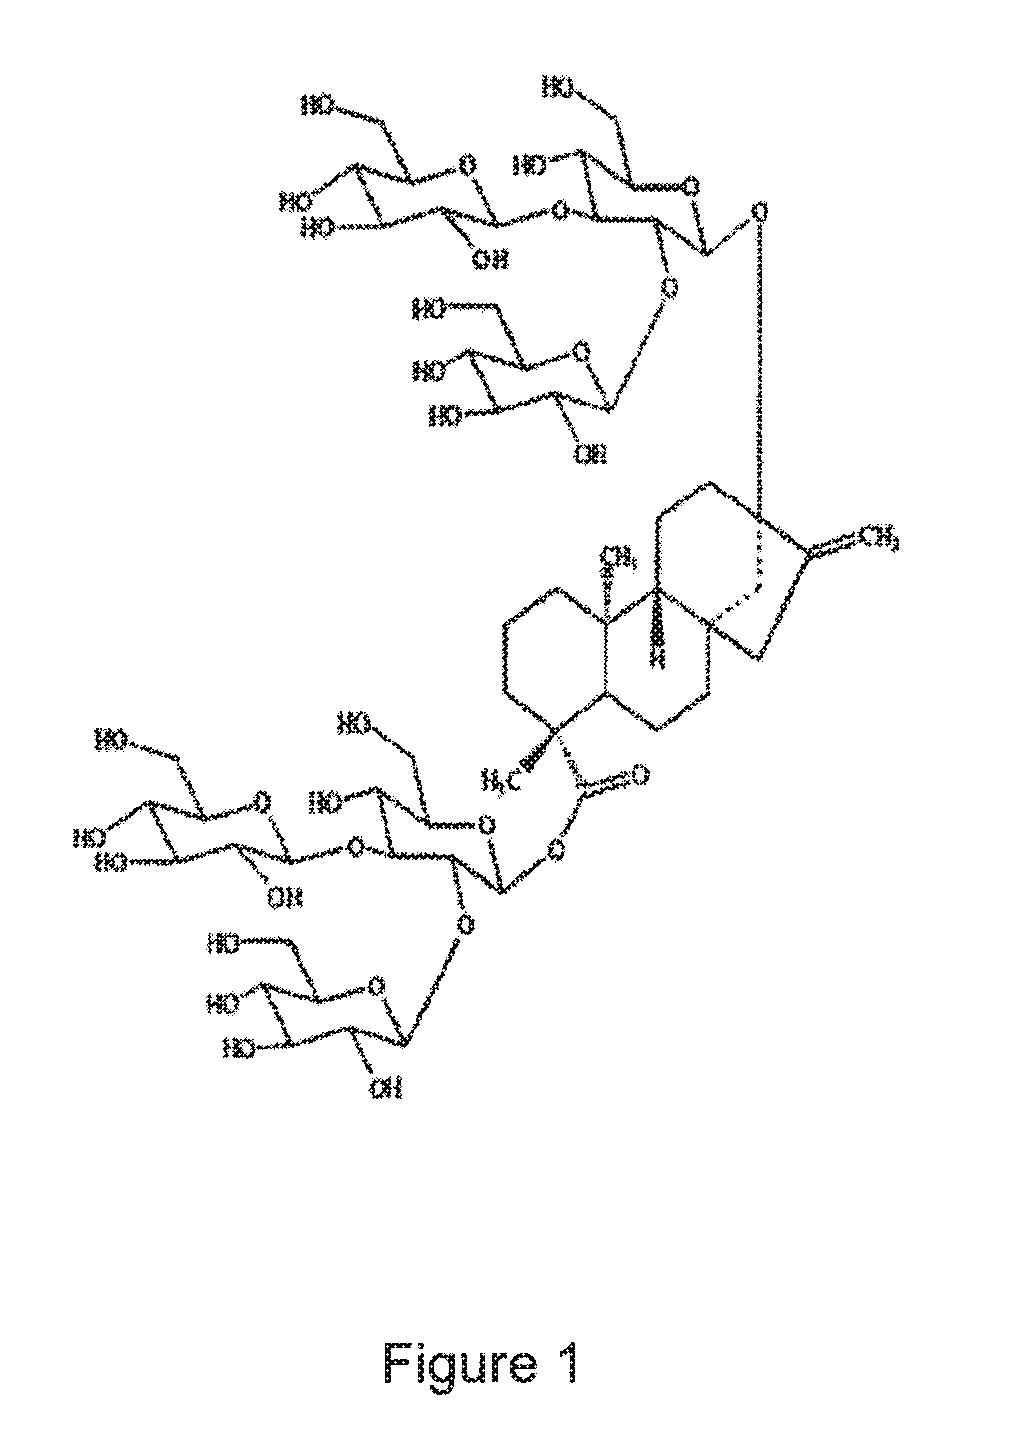 Methods of extraction and purification from stevia rebaudiana of compositions with enhanced rebaudioside-m content, uses of said composition and natural sweetener compositions with said composition